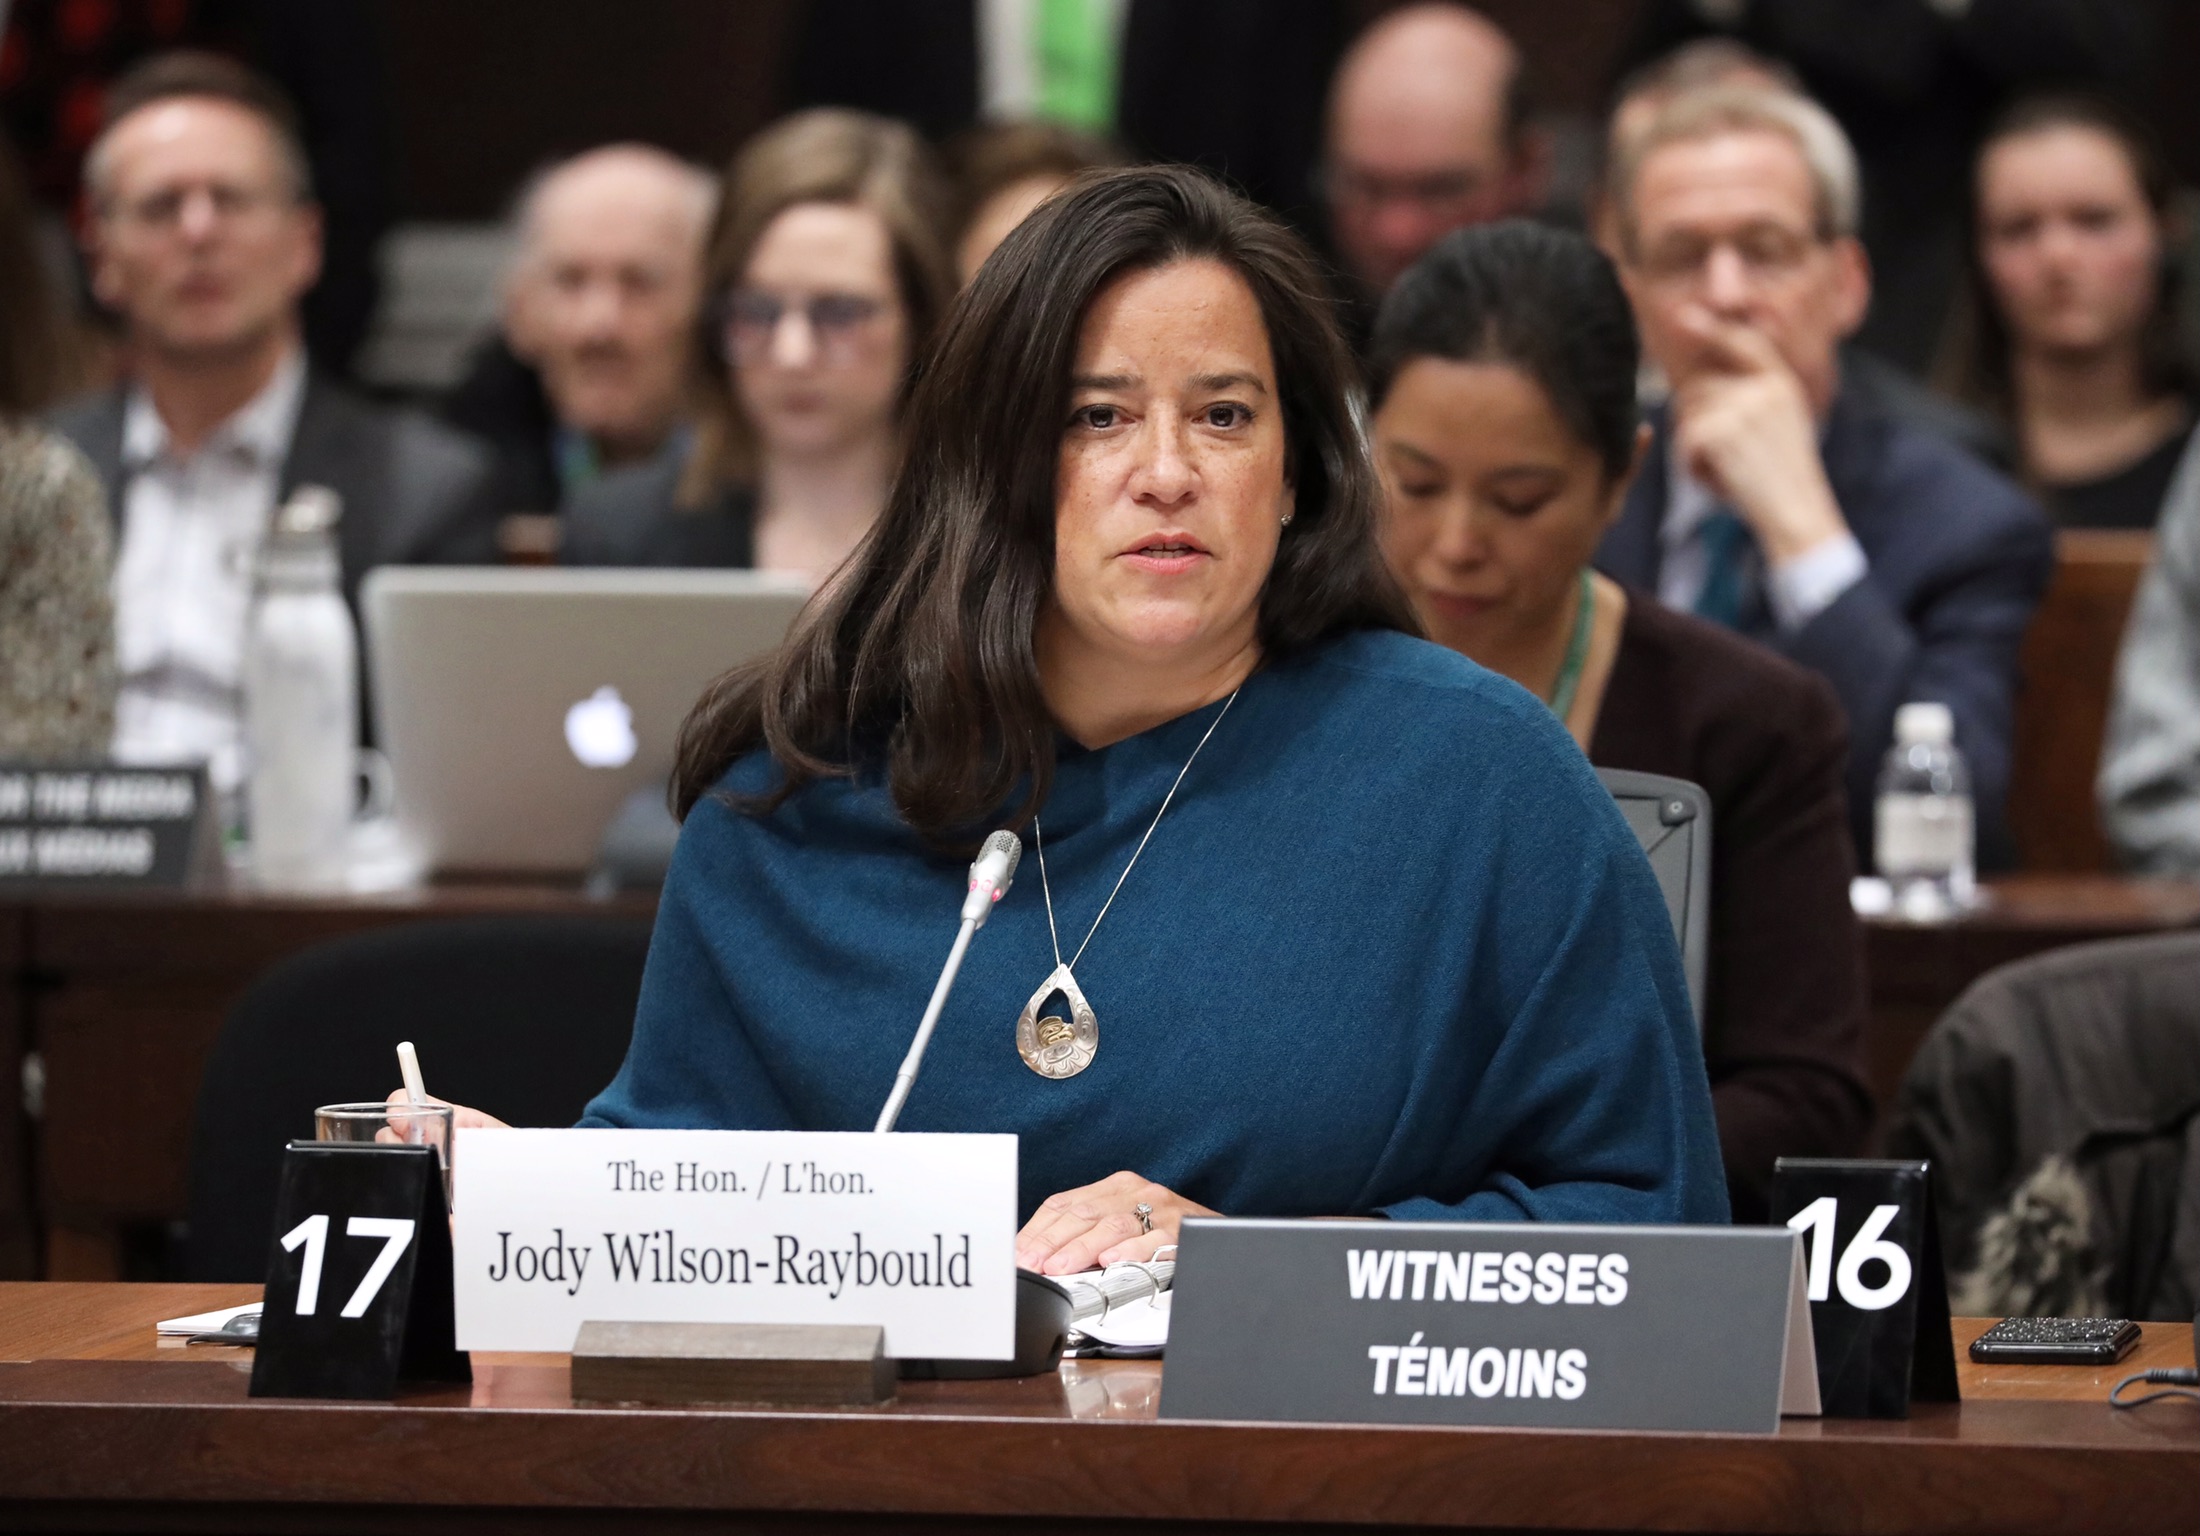 Liberal MP and former Canadian justice minister Jody Wilson-Raybould testifies before the House of Commons justice committee on Parliament Hill in Ottawa, Ontario, Canada, February 27, 2019. REUTERS/Chris Wattie